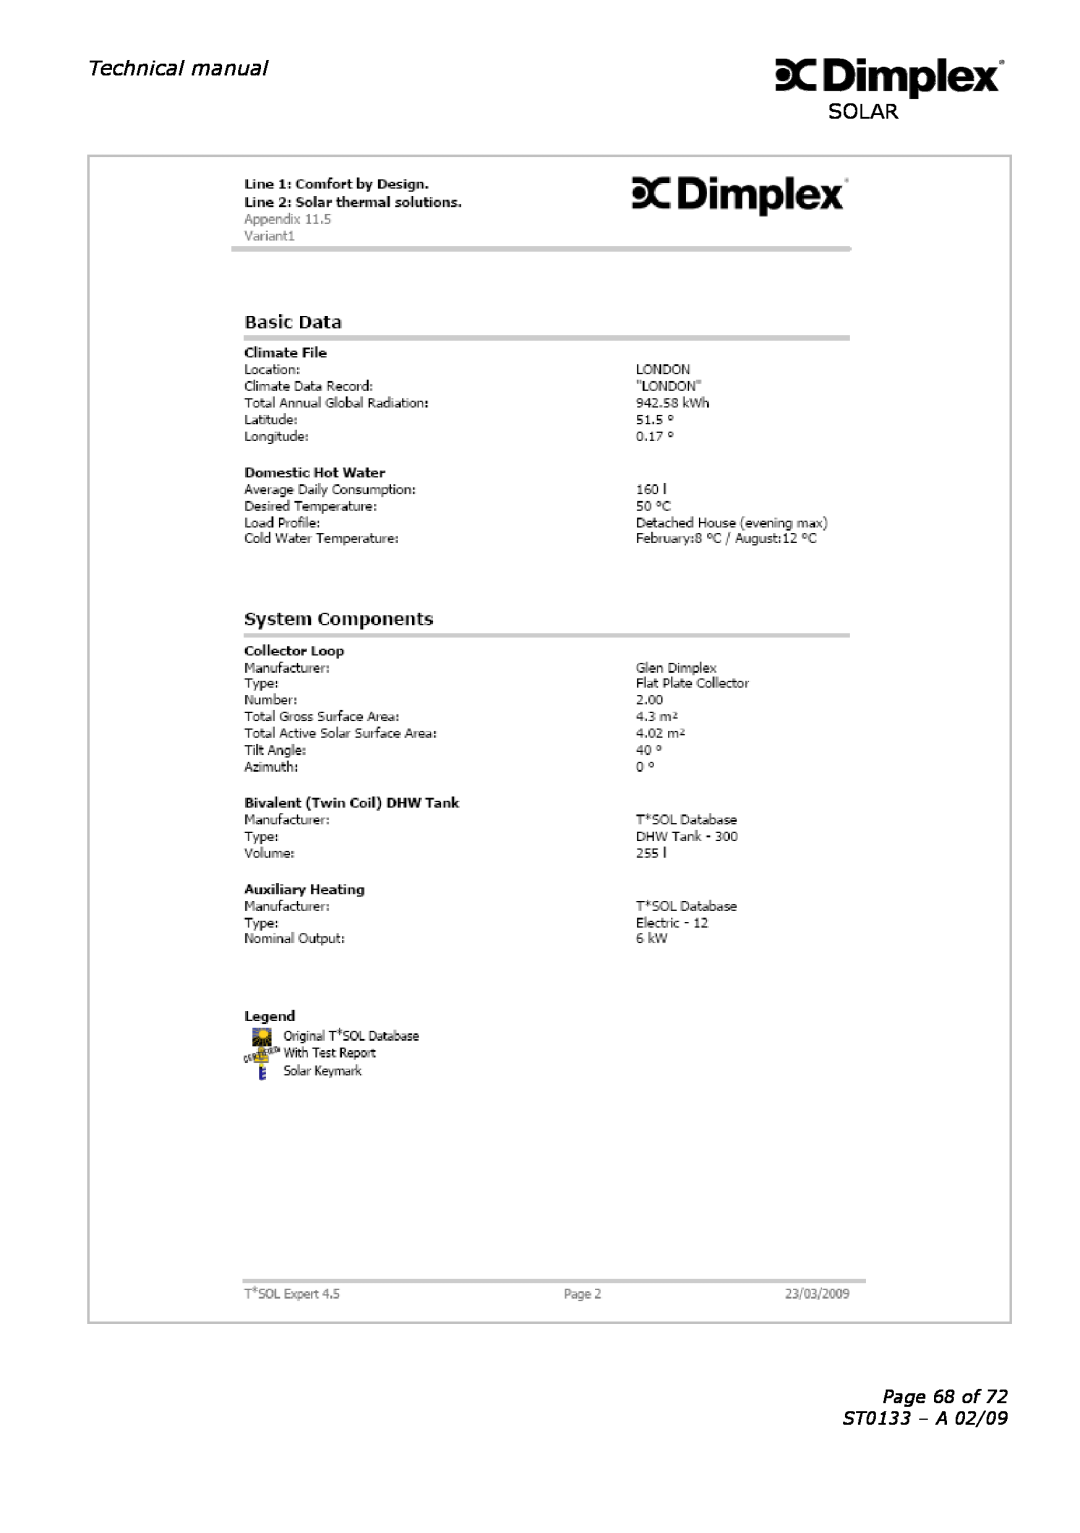 Dimplex technical manual Technical manual, Page 68 of ST0133 - A 02/09 